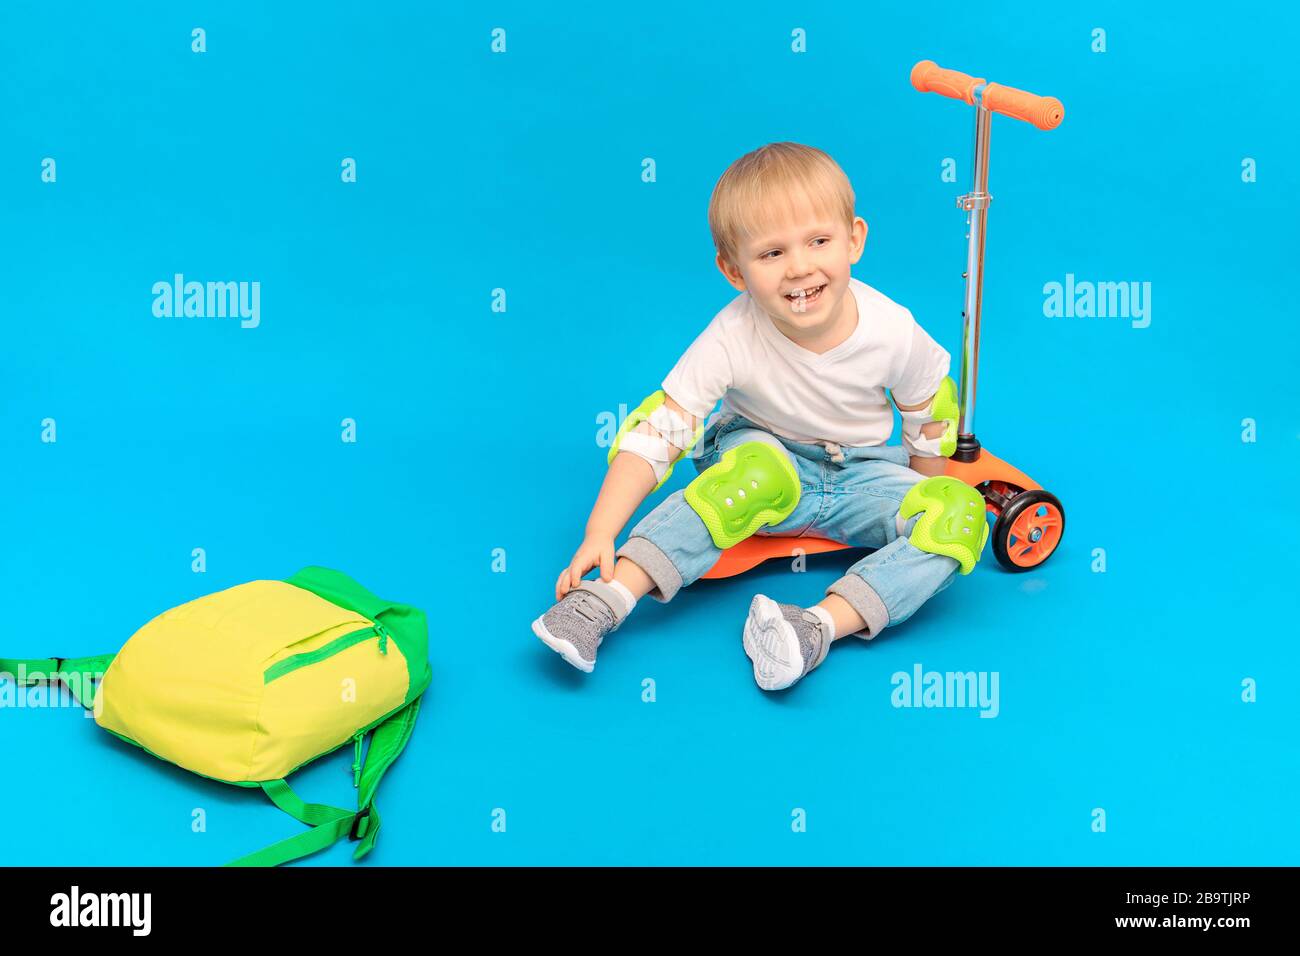 A child boy sits on a scooter in protection against abrasions and bruises, knee pads and elbow pieces and laughs. Studio photography with place for te Stock Photo